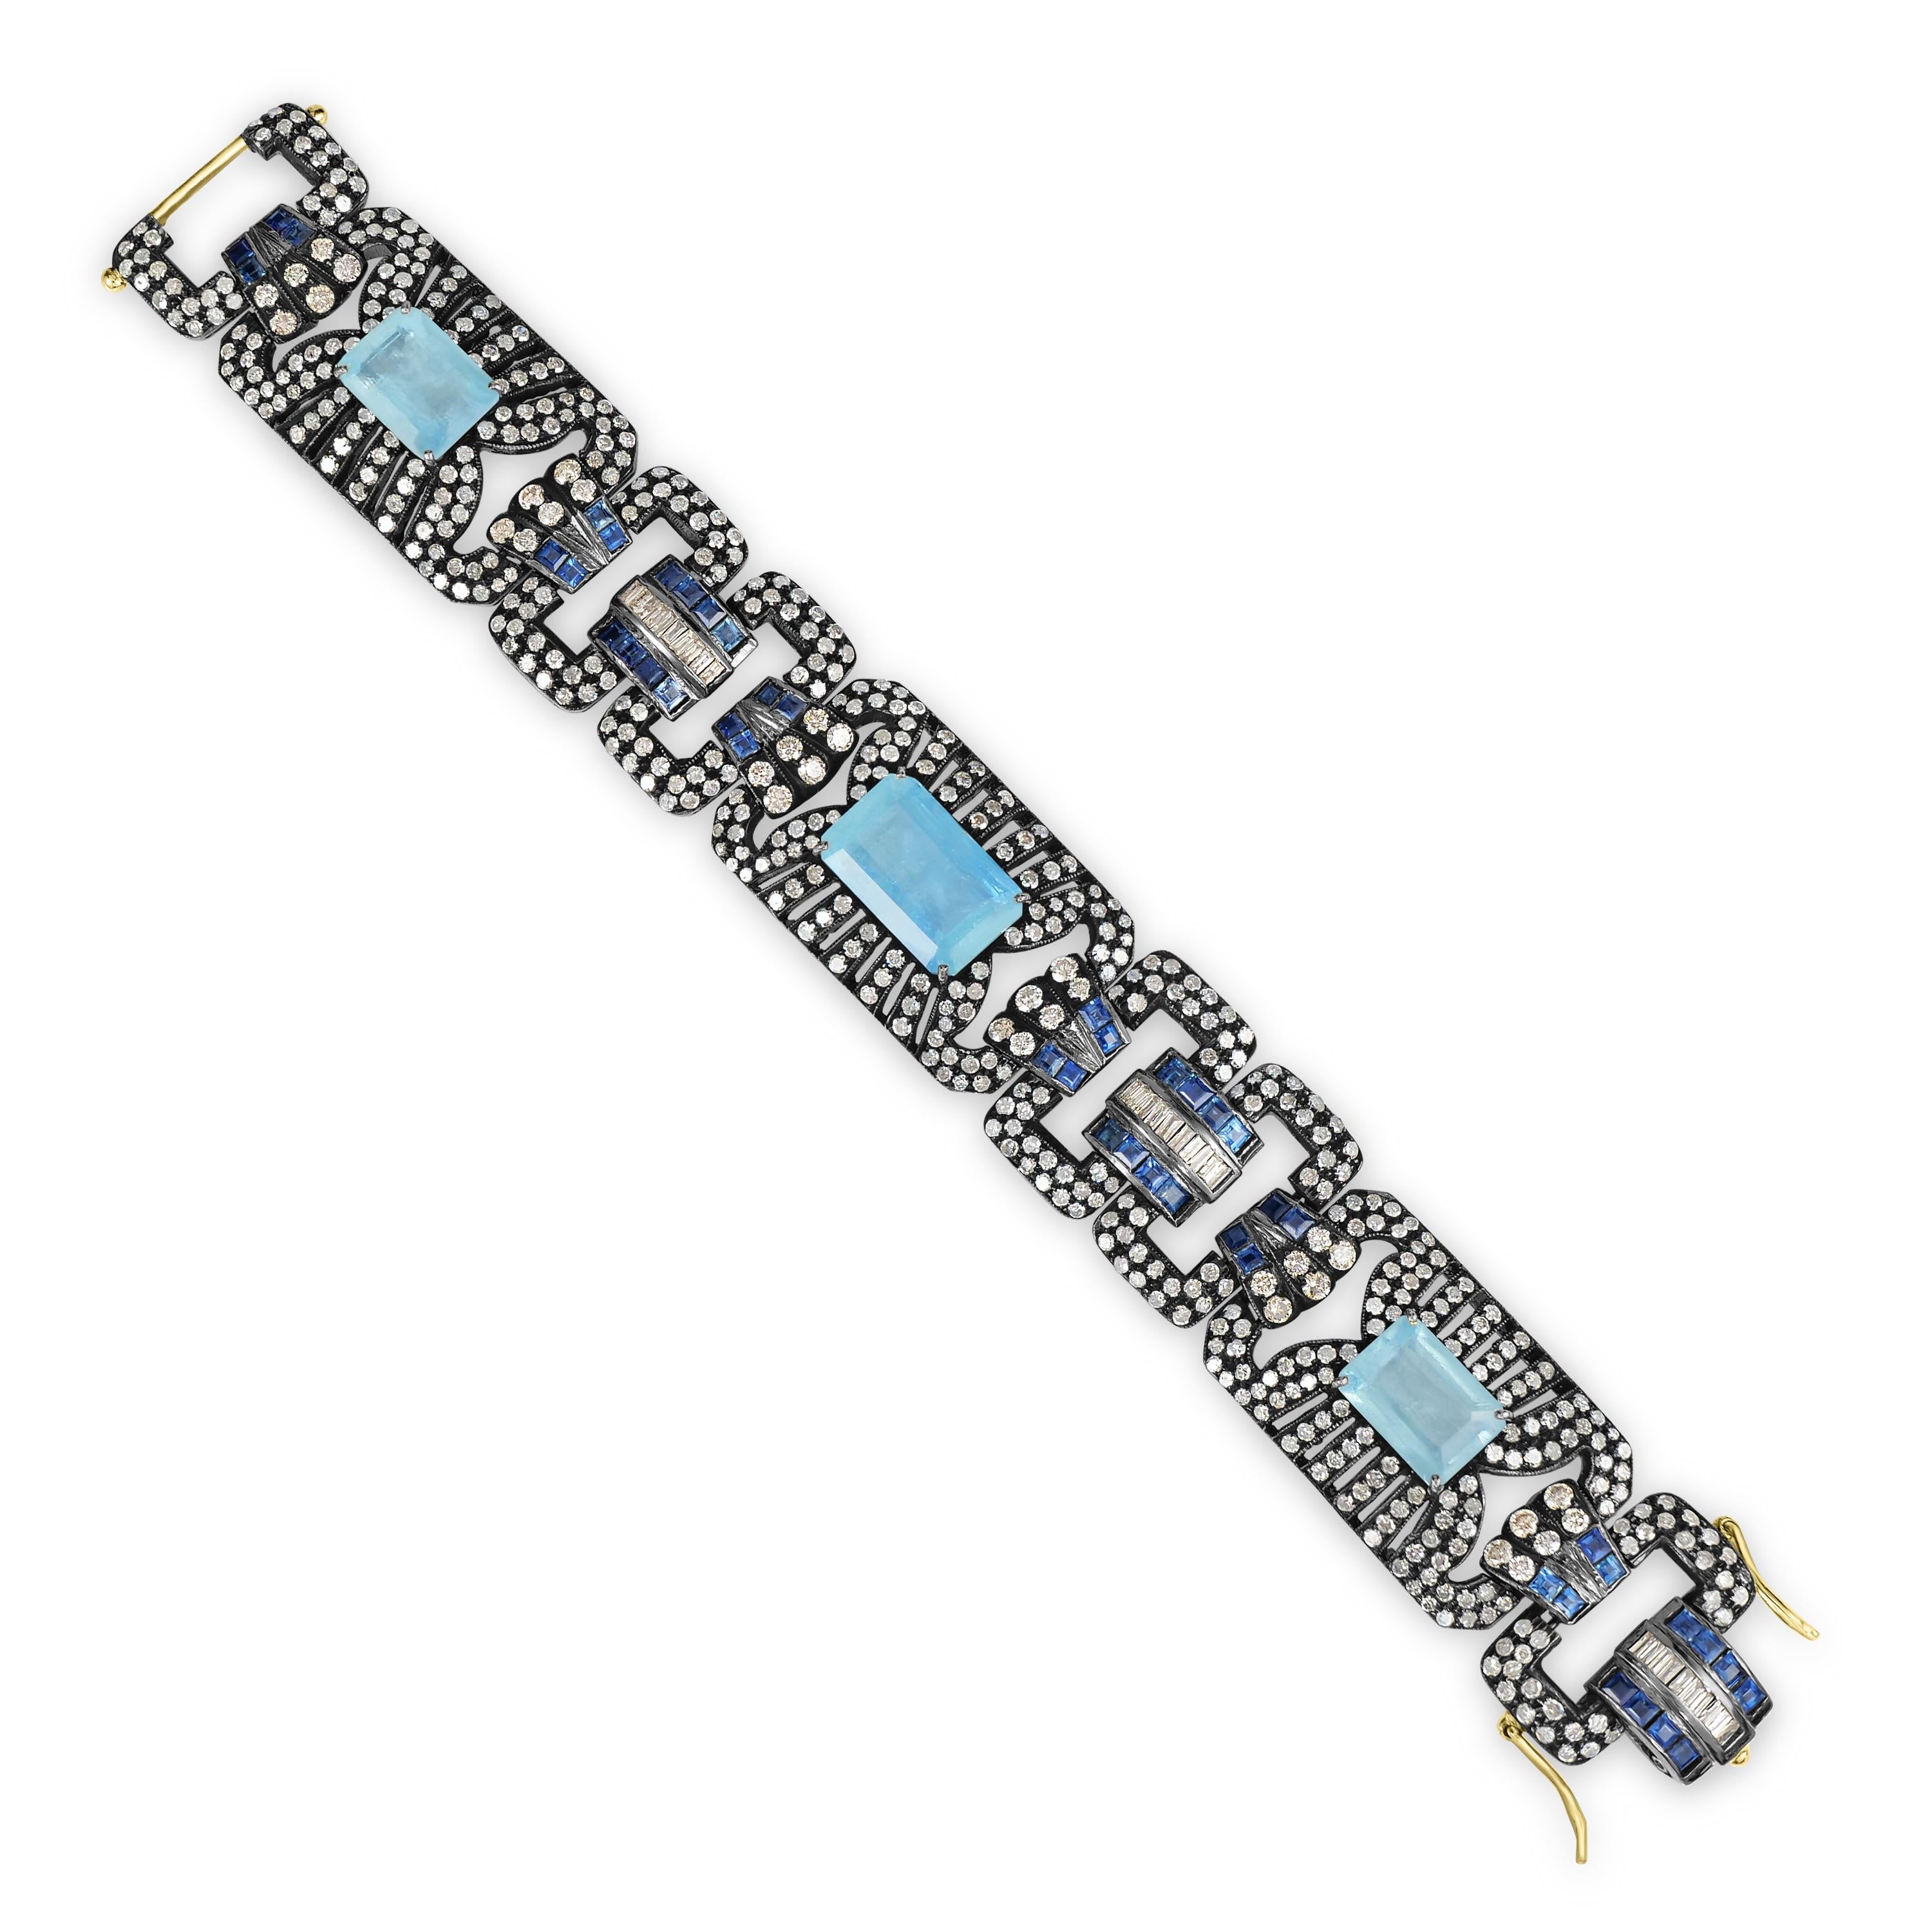 Introducing our stunning Victorian 27.5 Cttw. Aquamarine, Blue Sapphire, and Diamond Hinged Link Bracelet, a true masterpiece of Victorian elegance and craftsmanship.

Crafted with meticulous attention to detail, this exquisite bracelet features